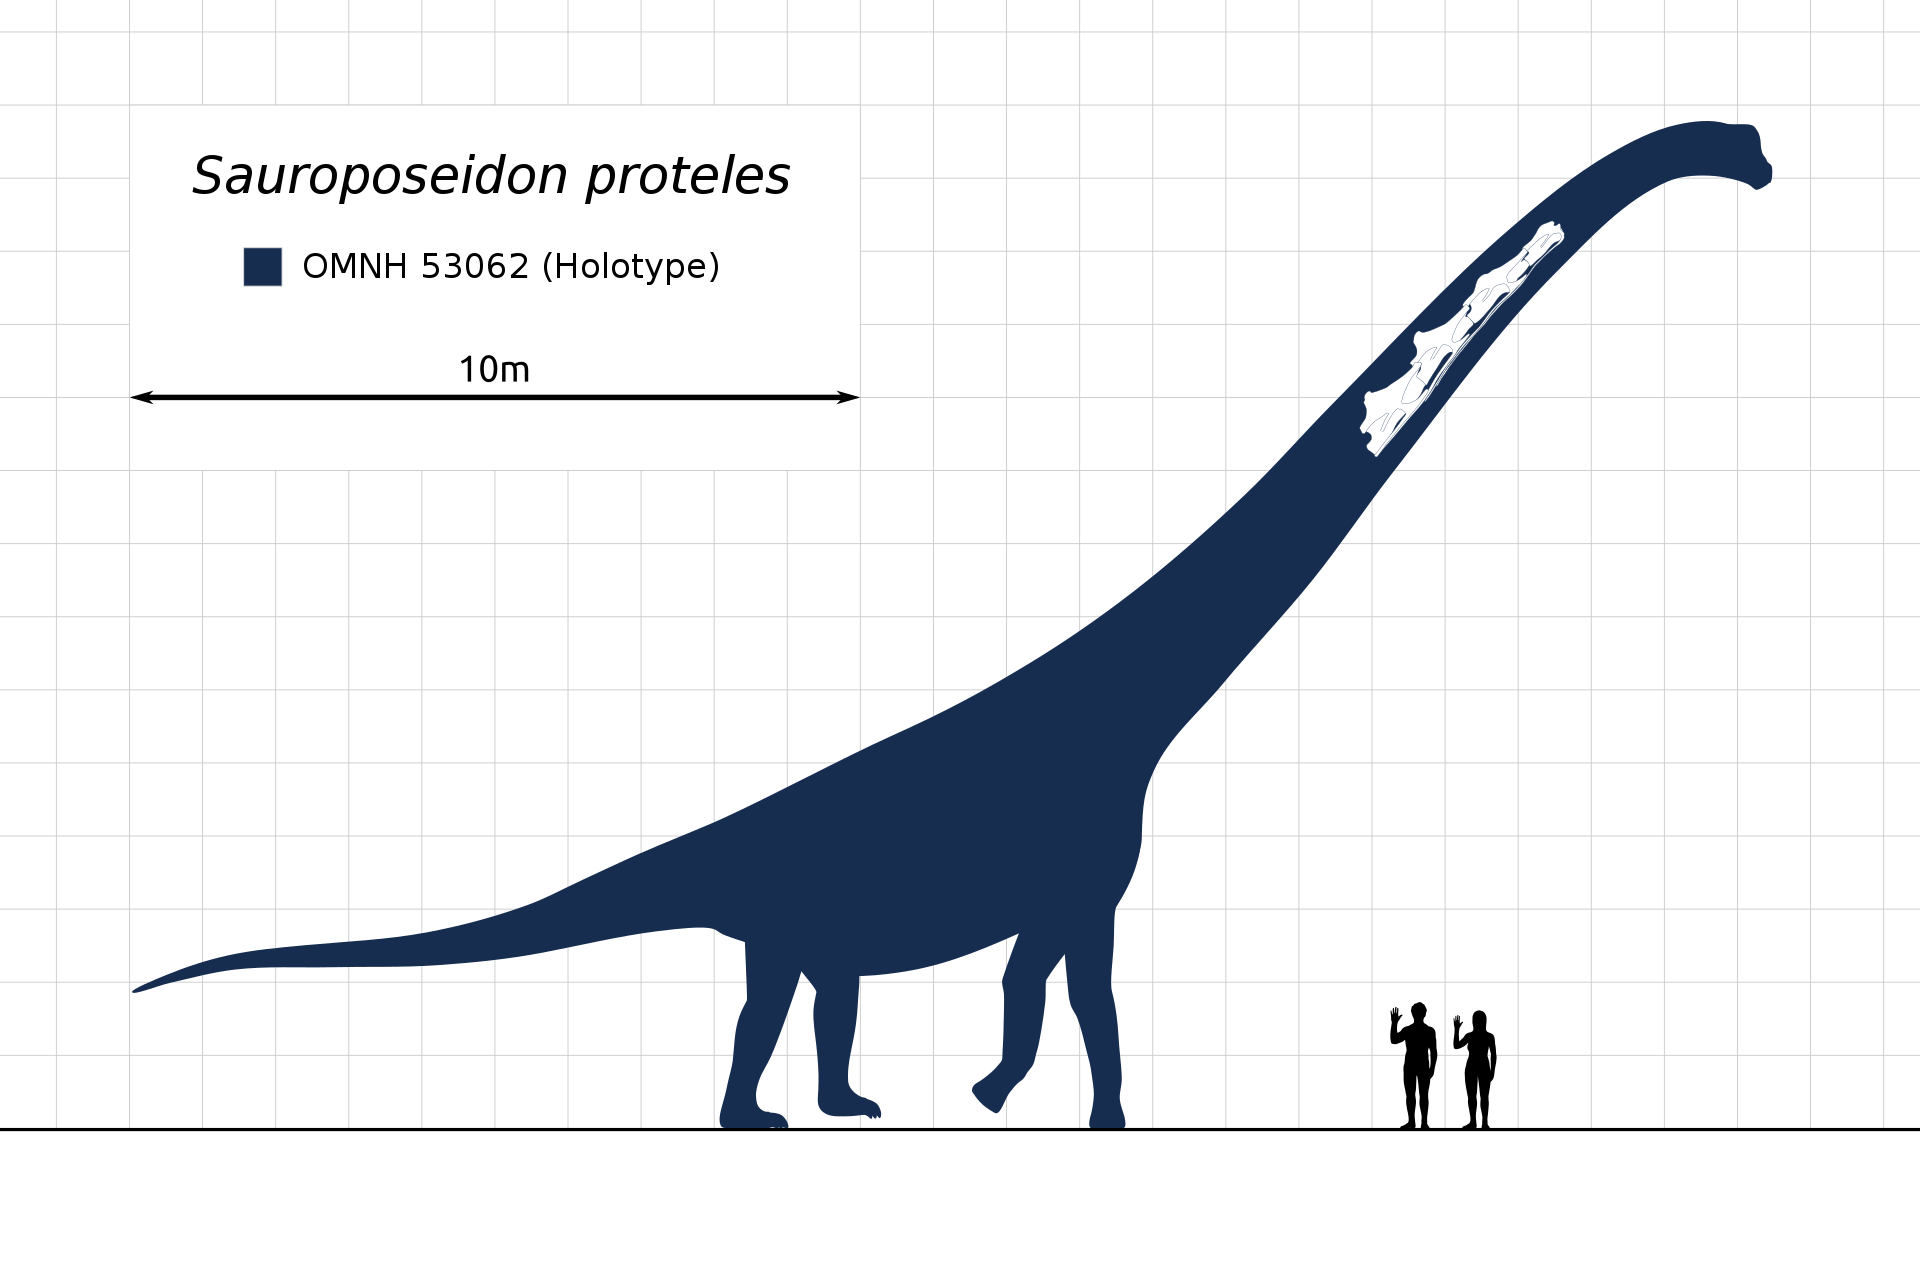 Illustration showing the silhouette of Sauroposeidon proteles next to two much smaller humans. The neck vertebrae of the holotype are illustrated in the silhouette of the dinosaur.